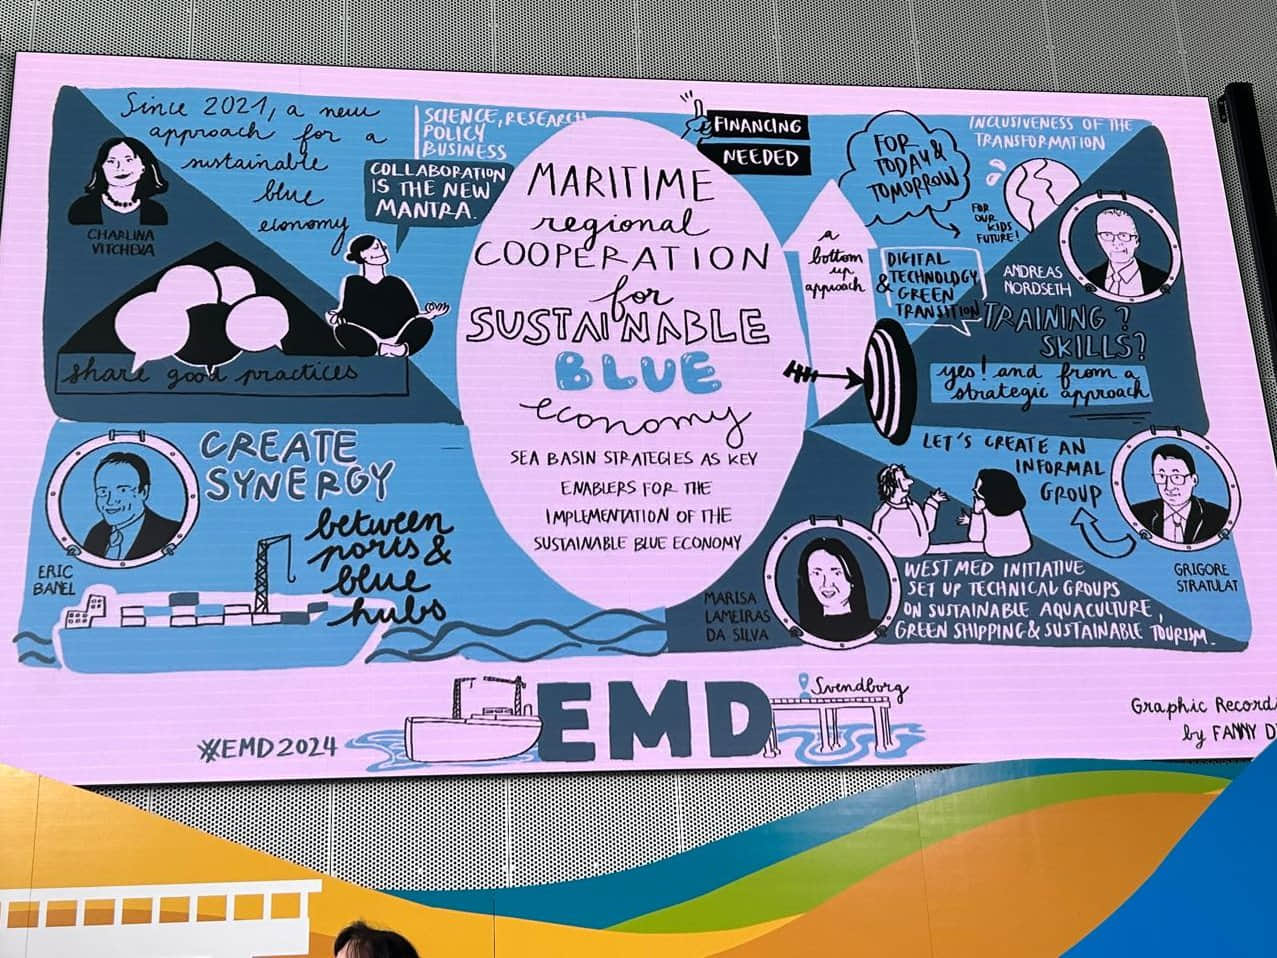 summary illustration with the main points of the high level panel on sea basin strategies during EMD2024